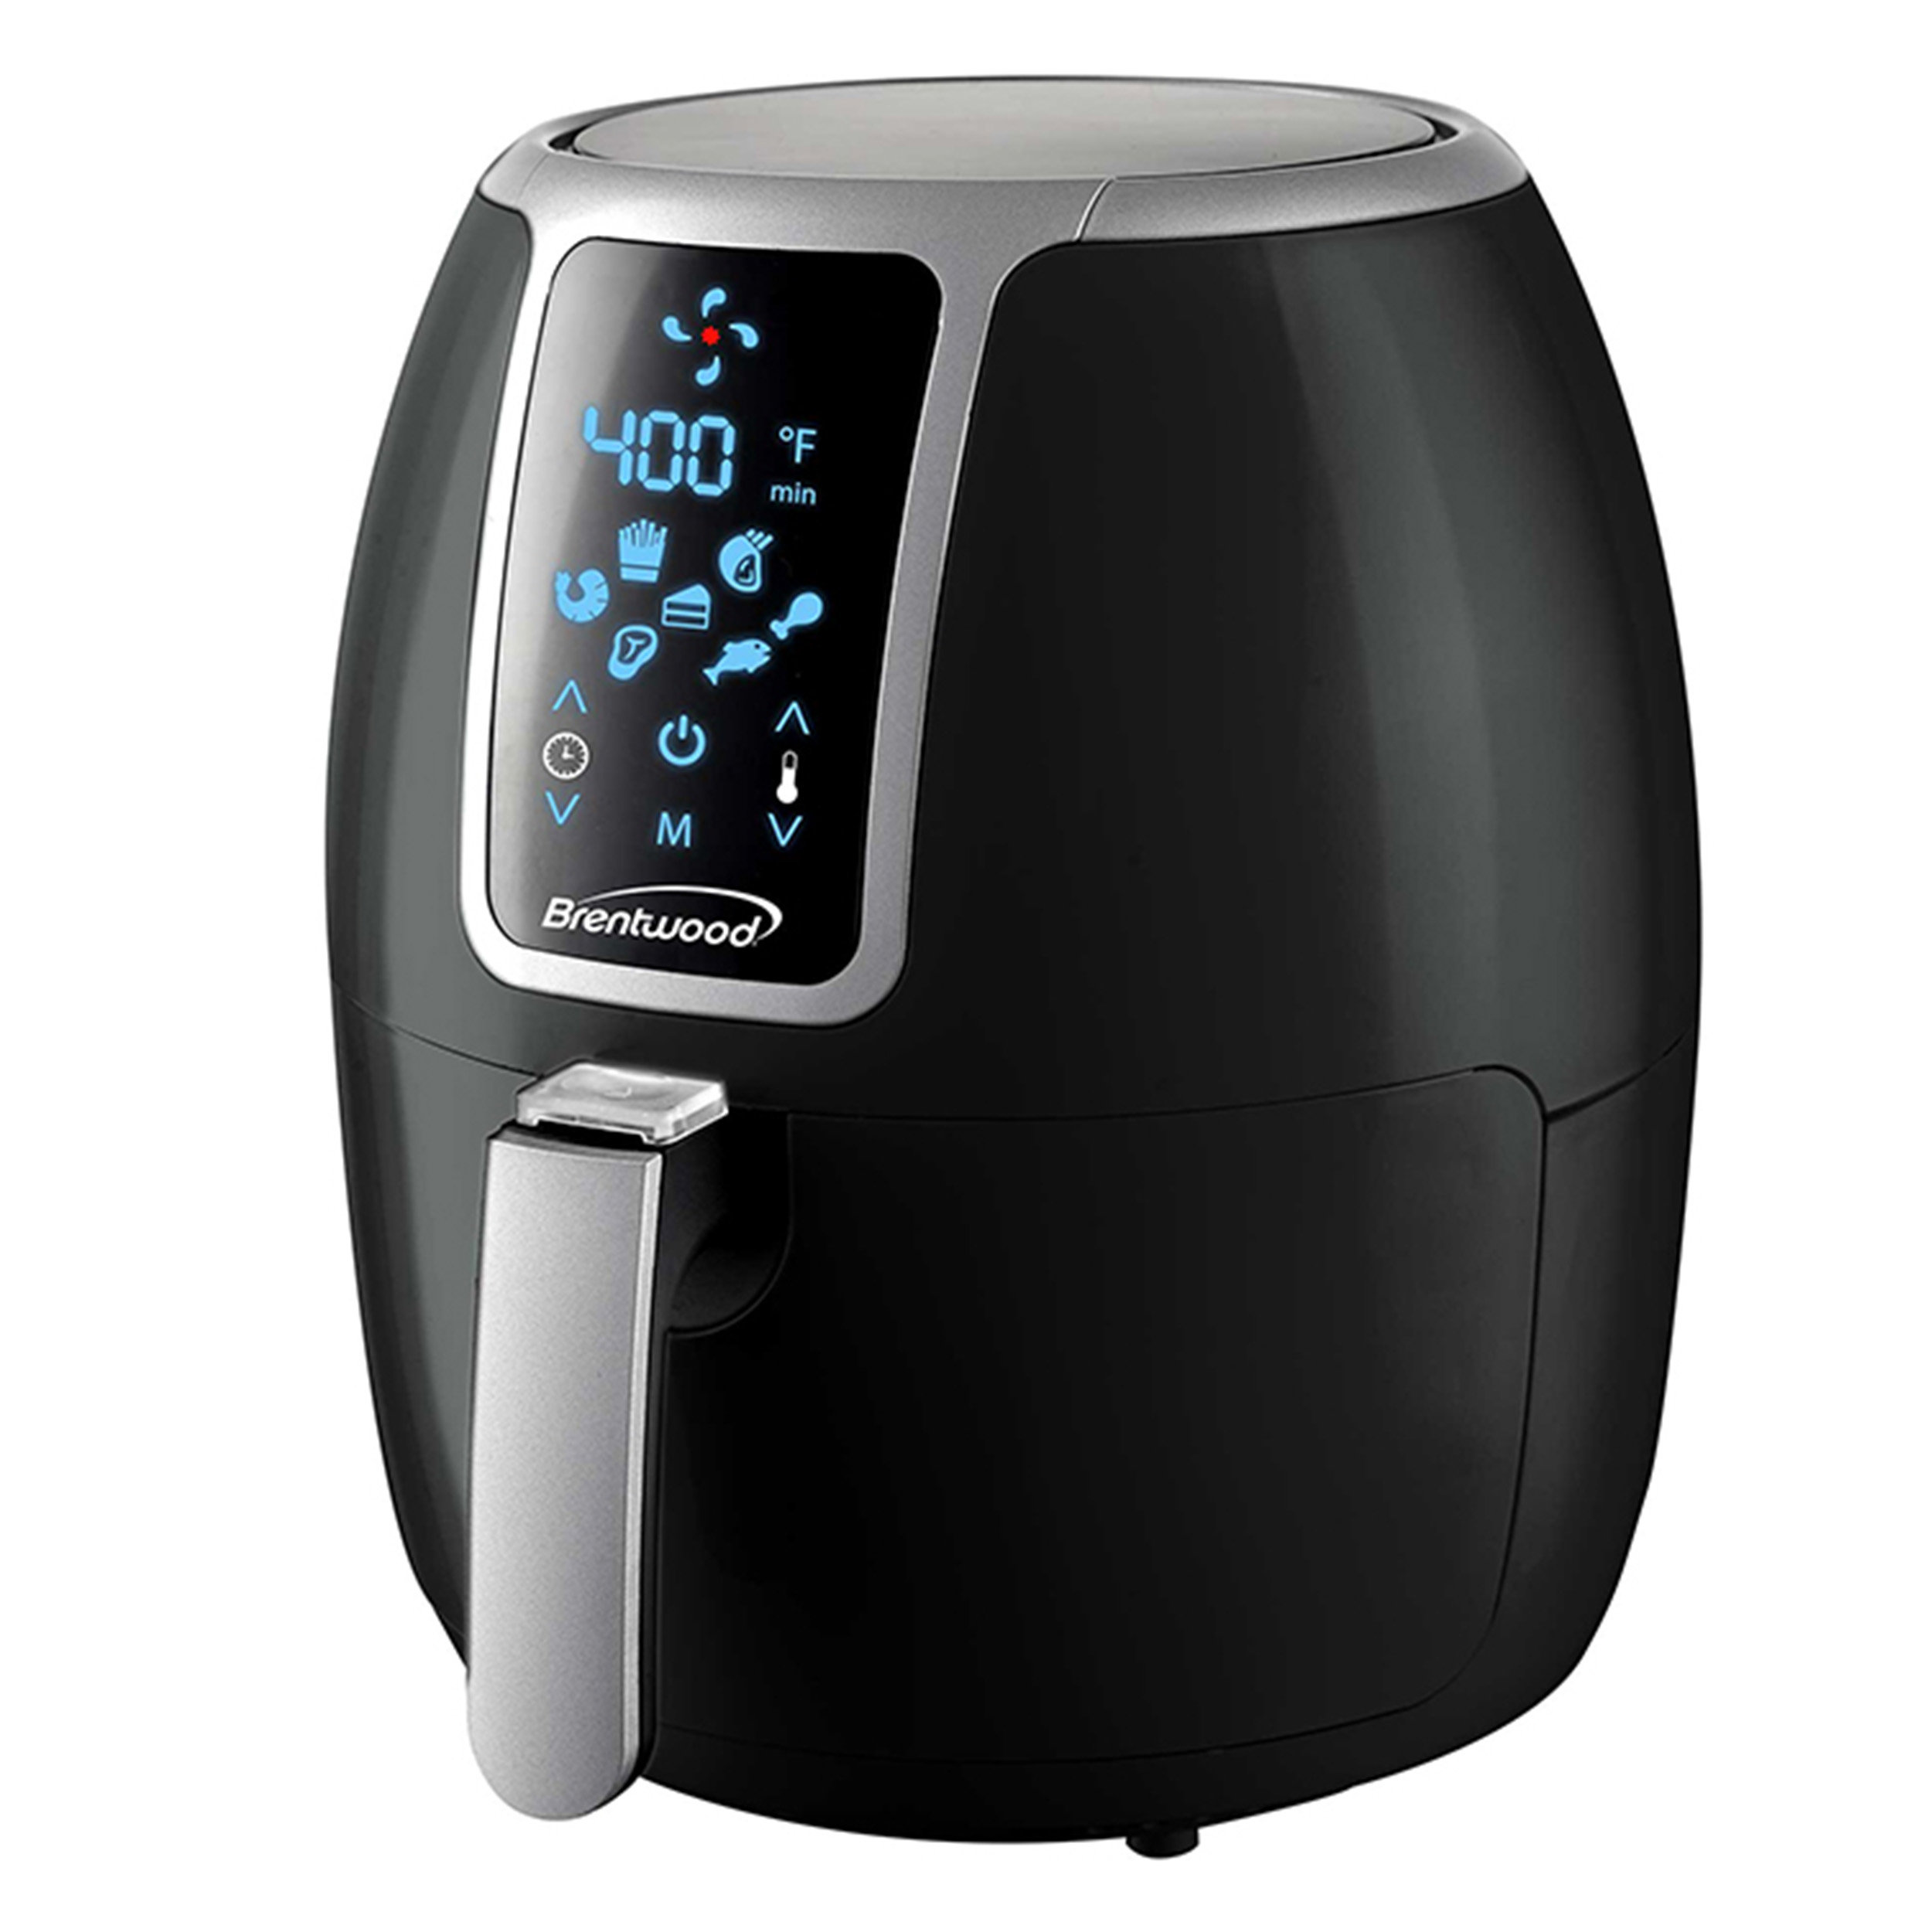 MOOSOO Air Fryer 2 Quart Small Air Fryer Oven Oilless with Free Air Fryer  Paper Liners and Recipes 